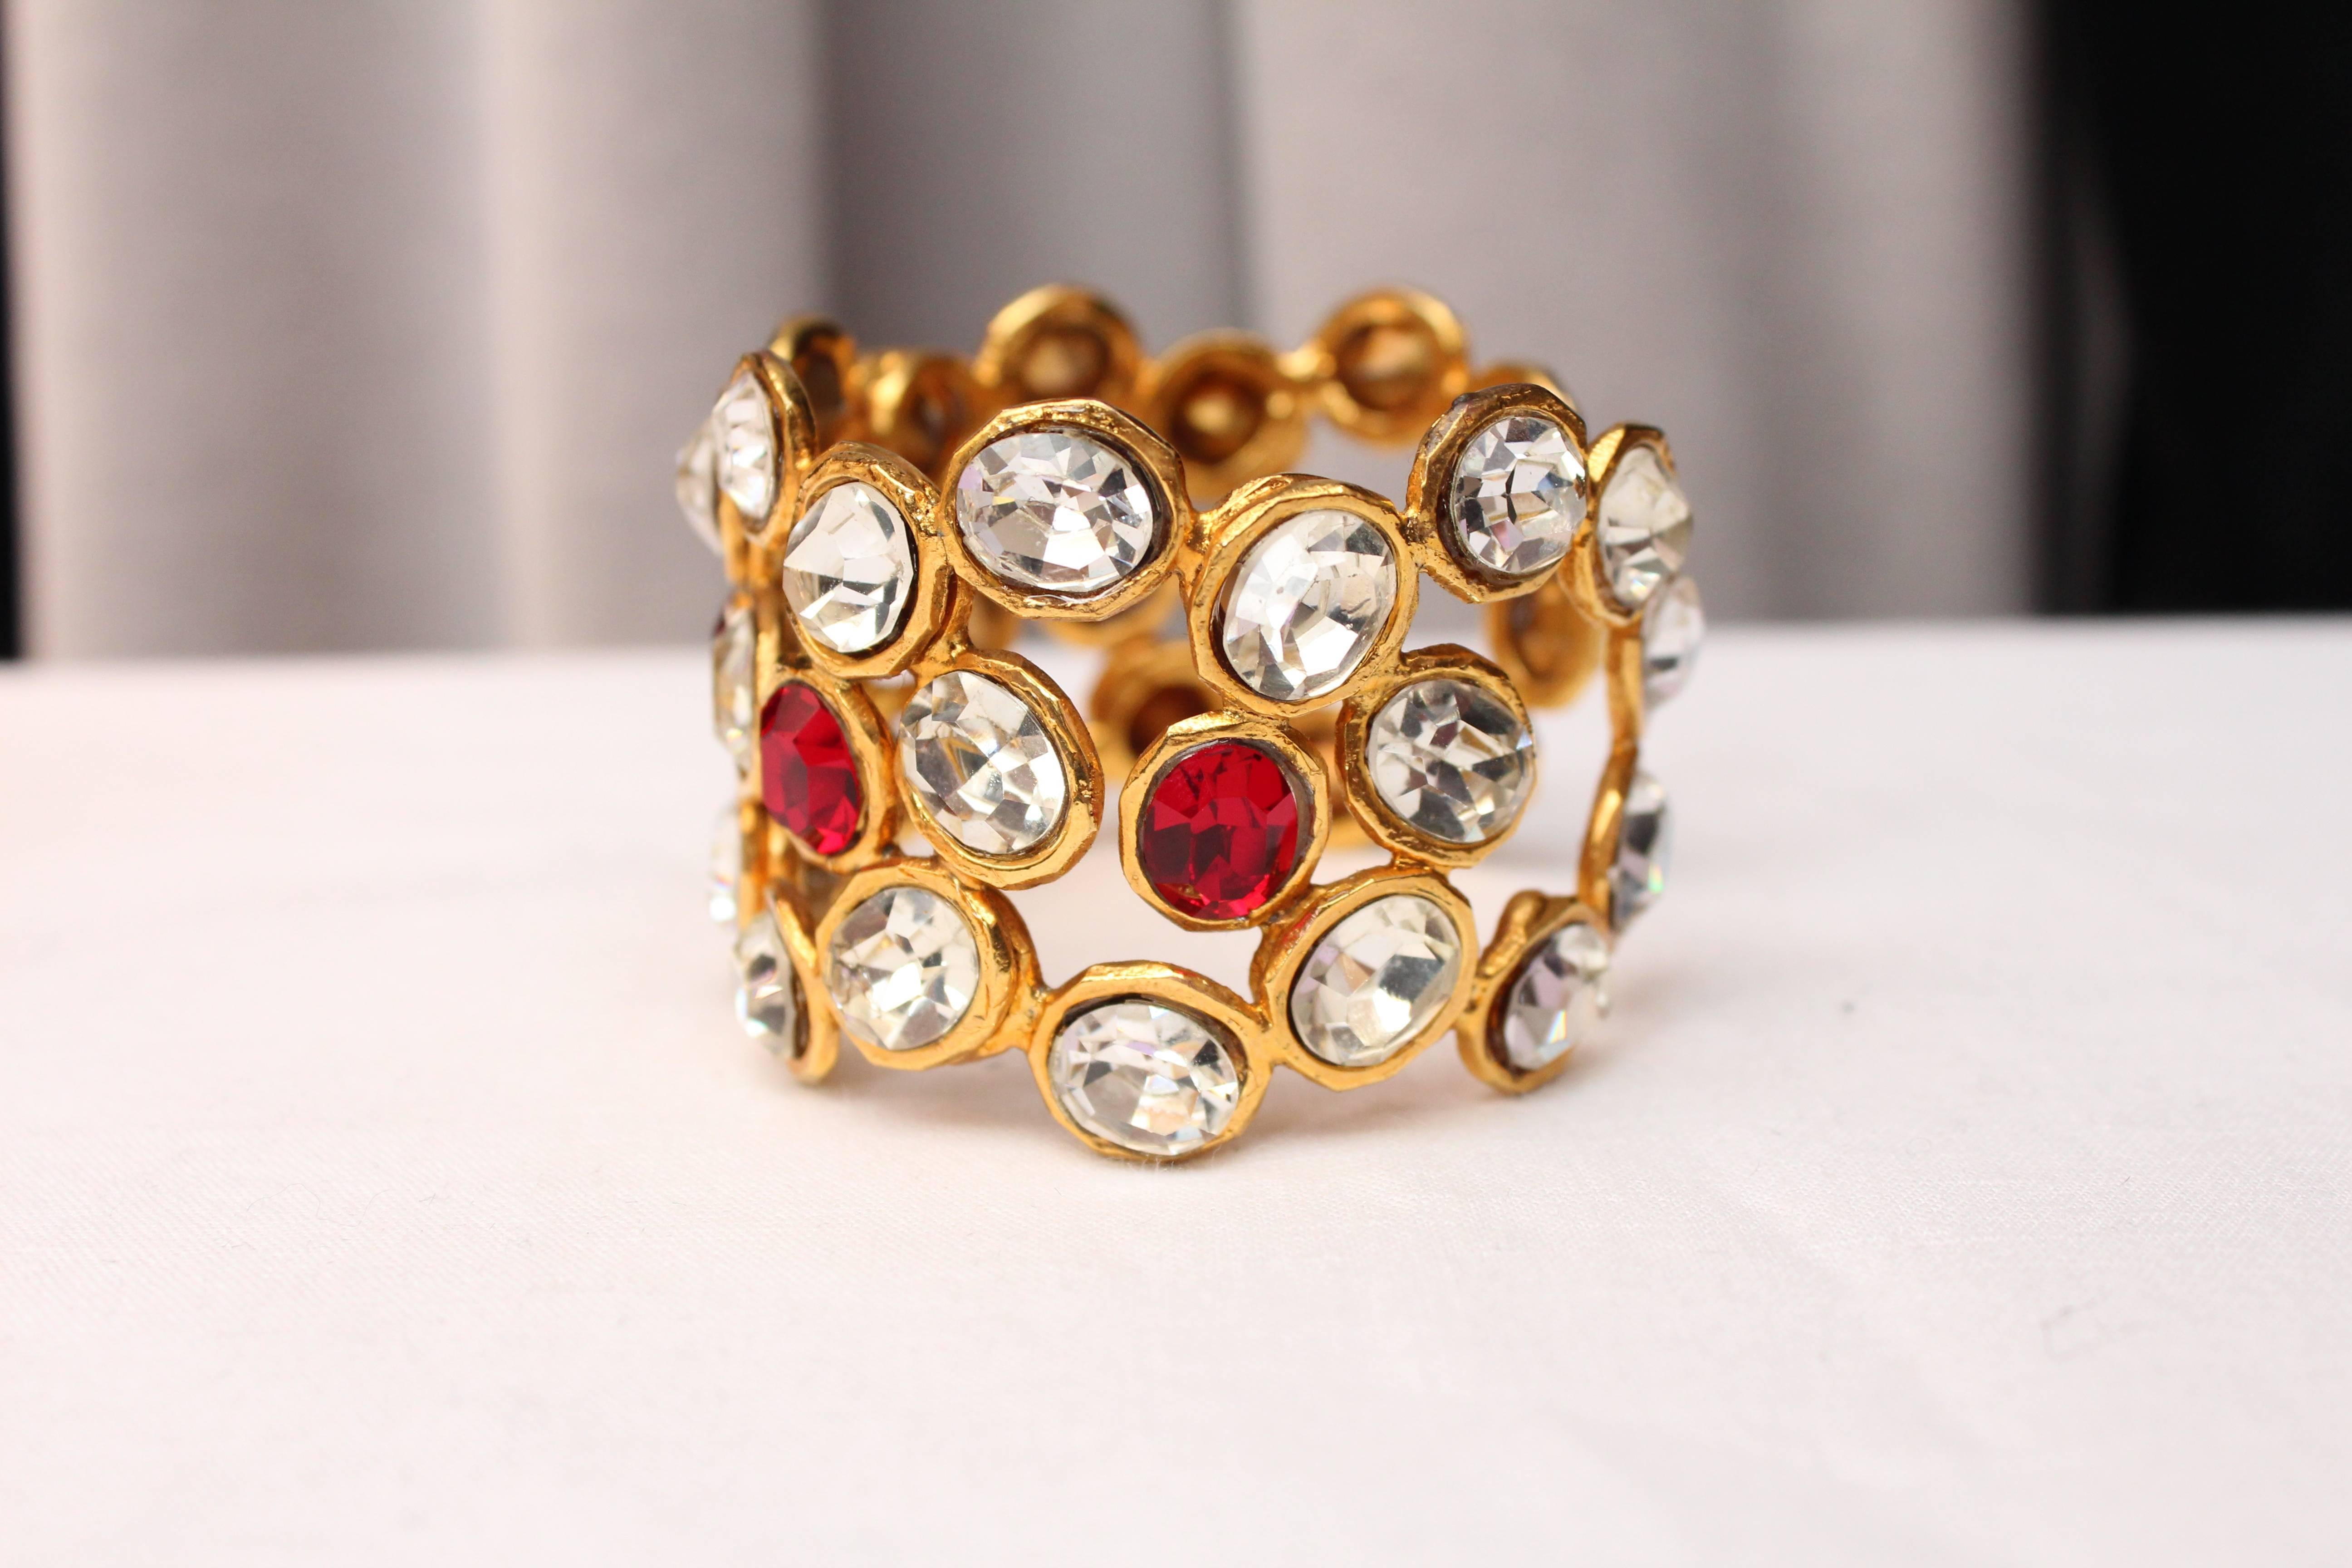 CHANEL (Made in France) Openwork gilt metal bracelet cuff paved with red and white large oval crystals. 

Collection 2 9

Very good condition.

Measurements:
Wrist size: 18 cm
Open space: 3 cm